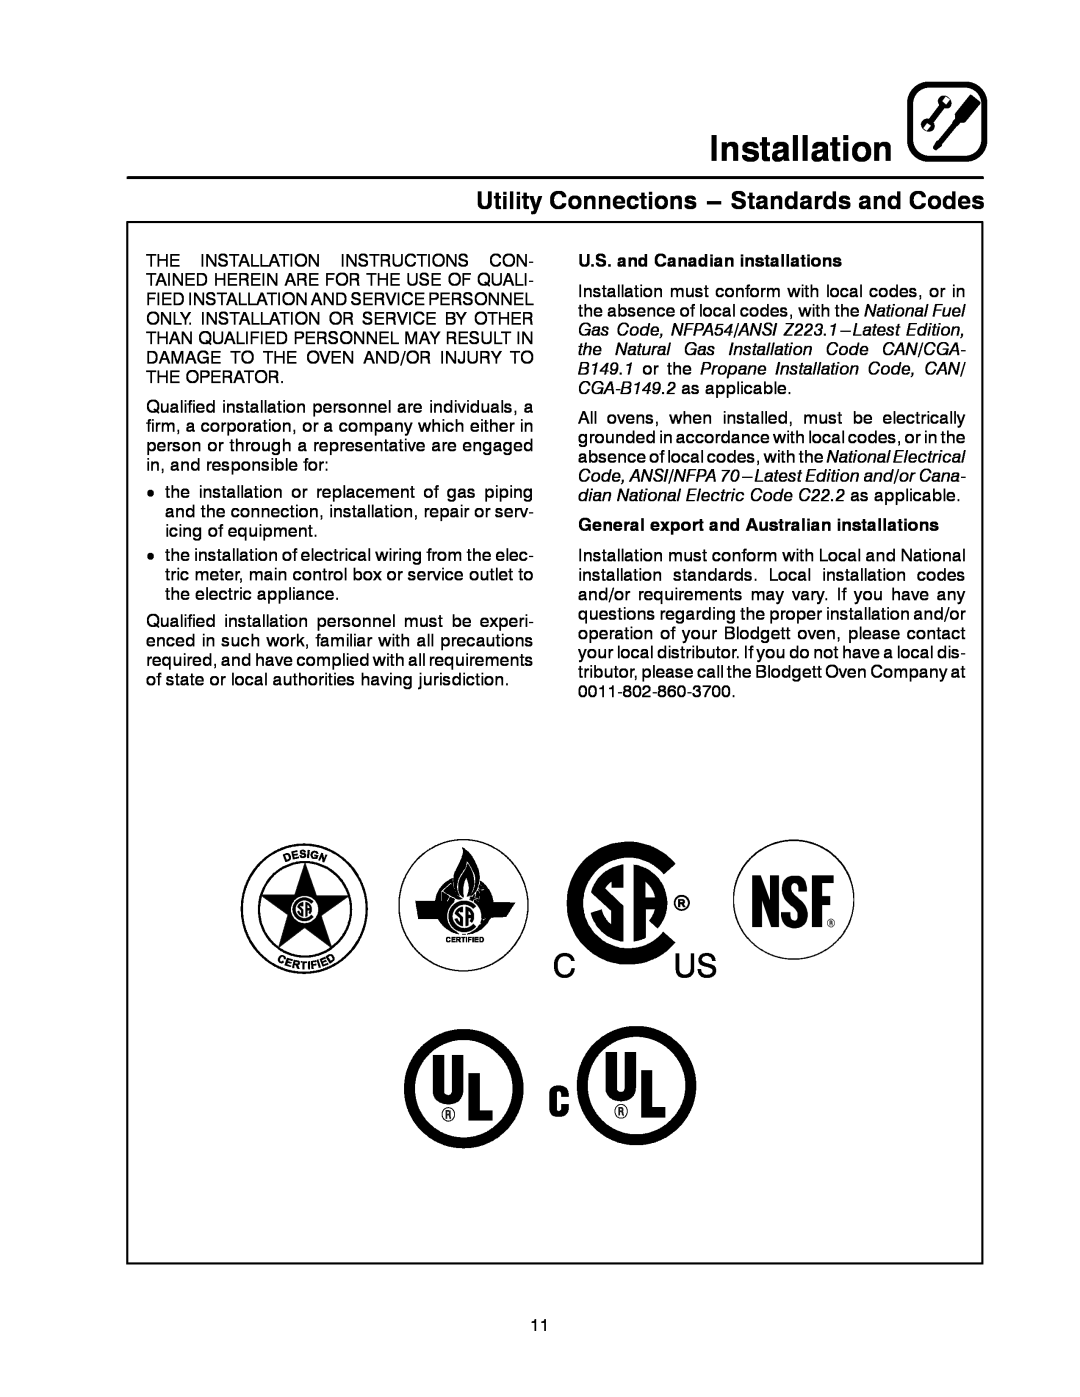 Blodgett MT1828E, MT1828G manual Utility Connections --- Standards and Codes, Installation, U.S. and Canadian installations 